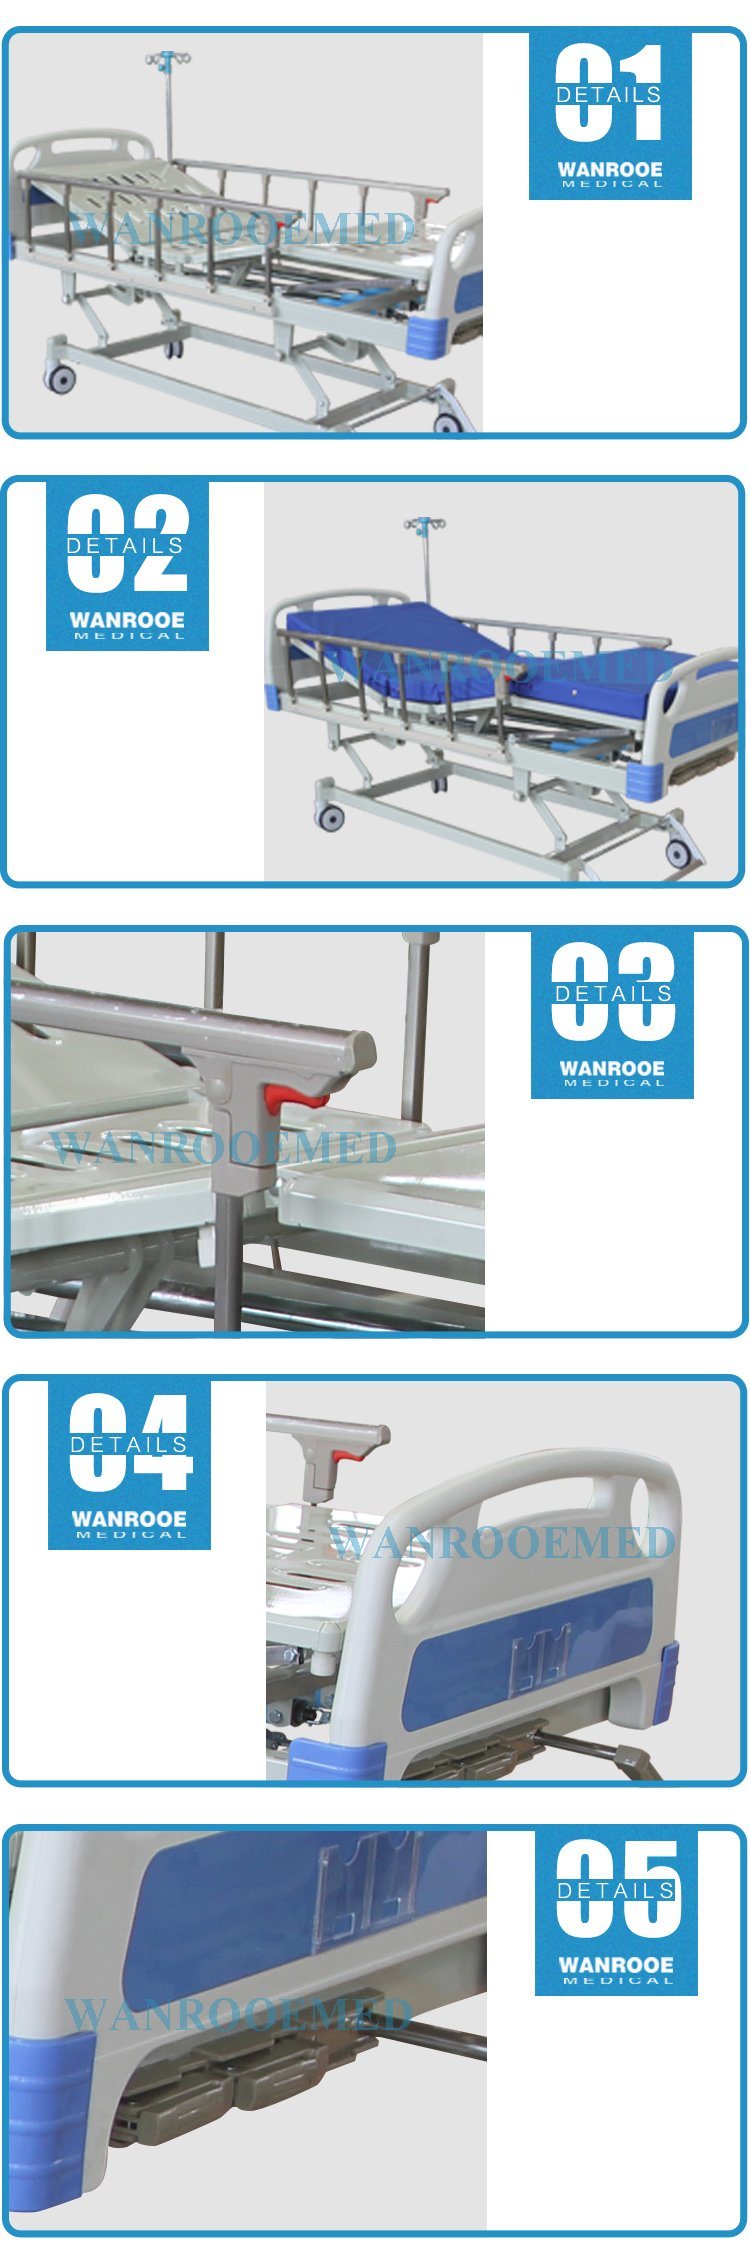 Bam302 Hospital Adjustable Manual Three Crank Bed for Patient